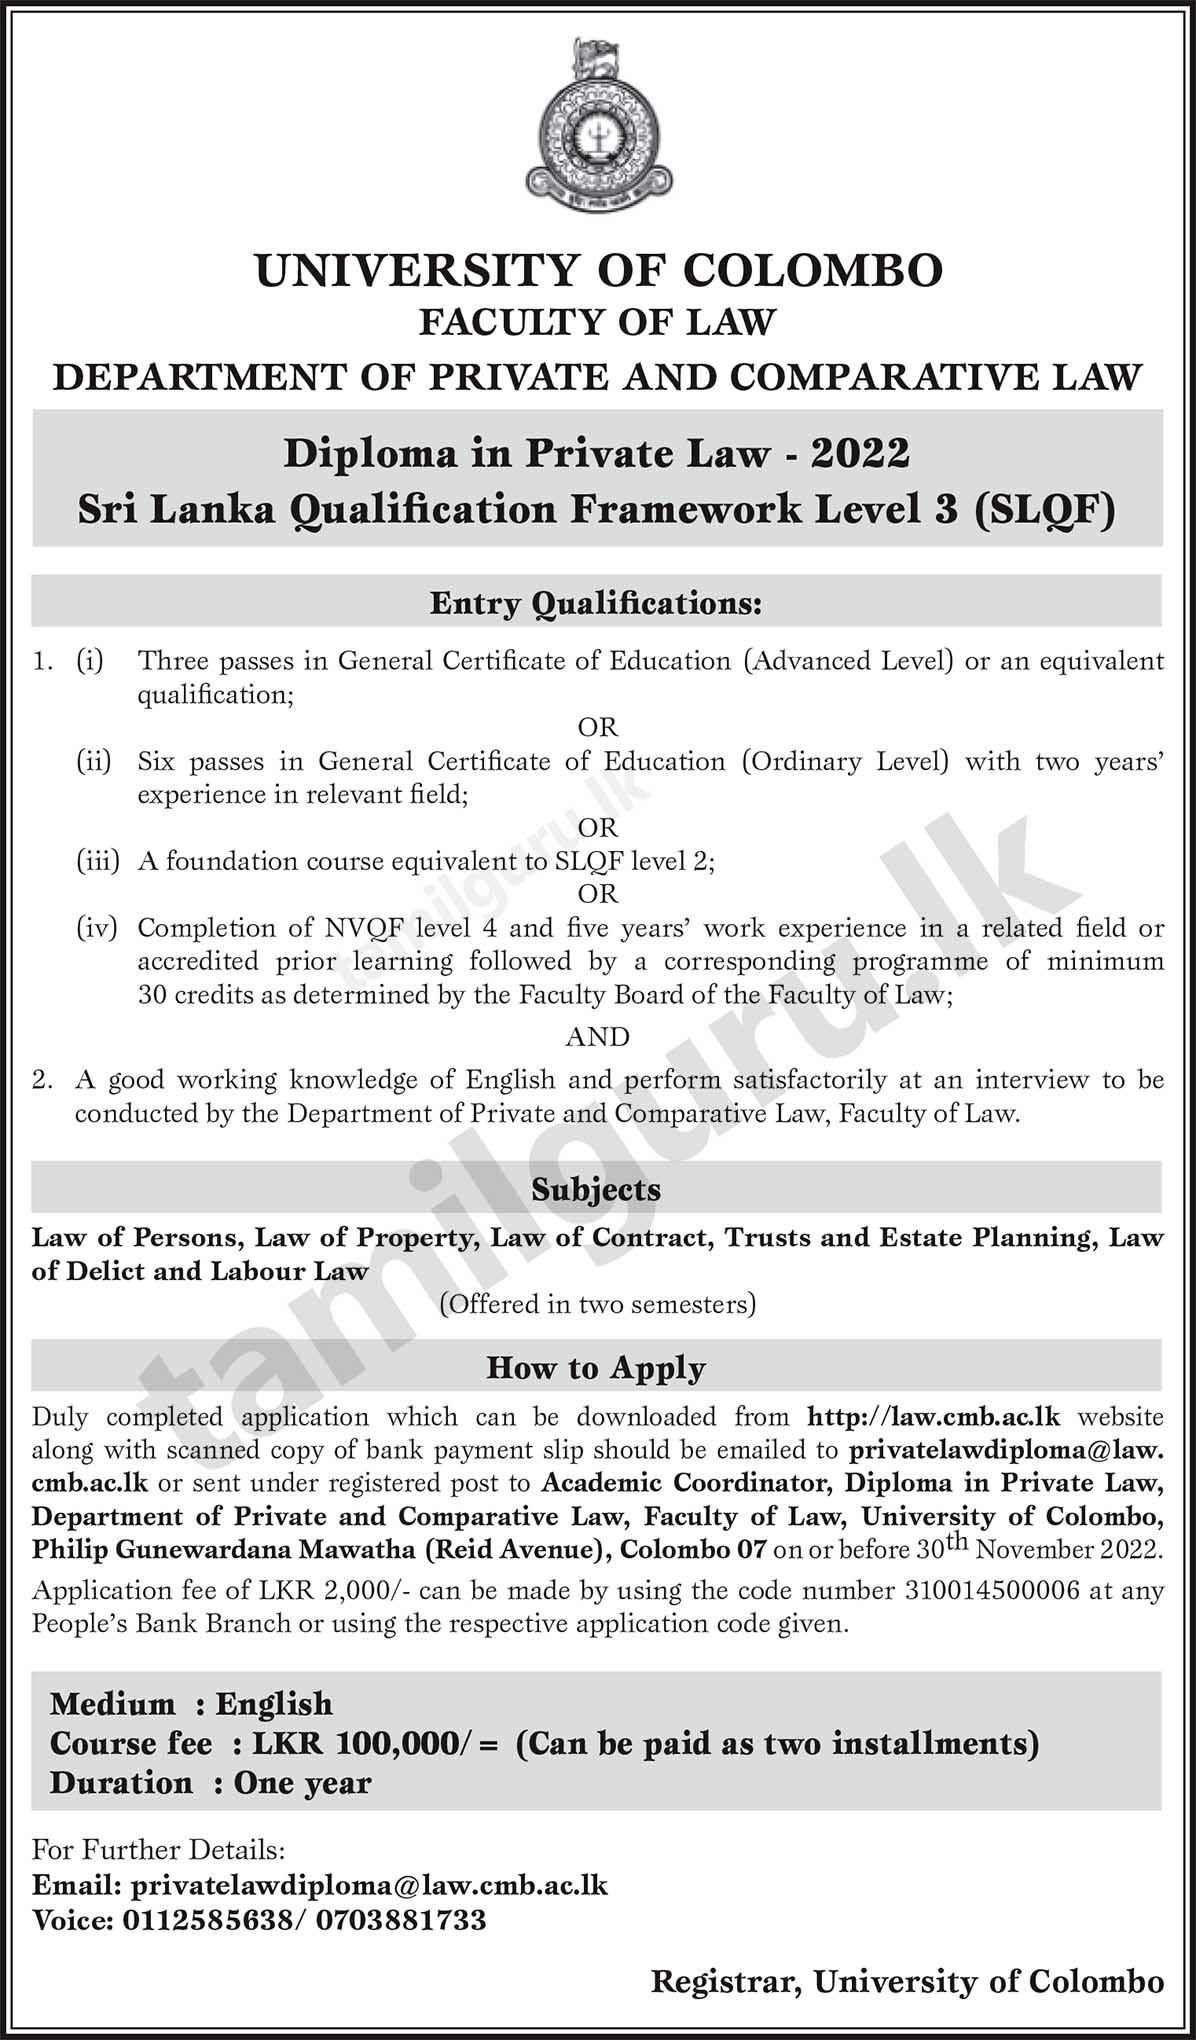 Diploma in Private Law (2022) - University of Colombo